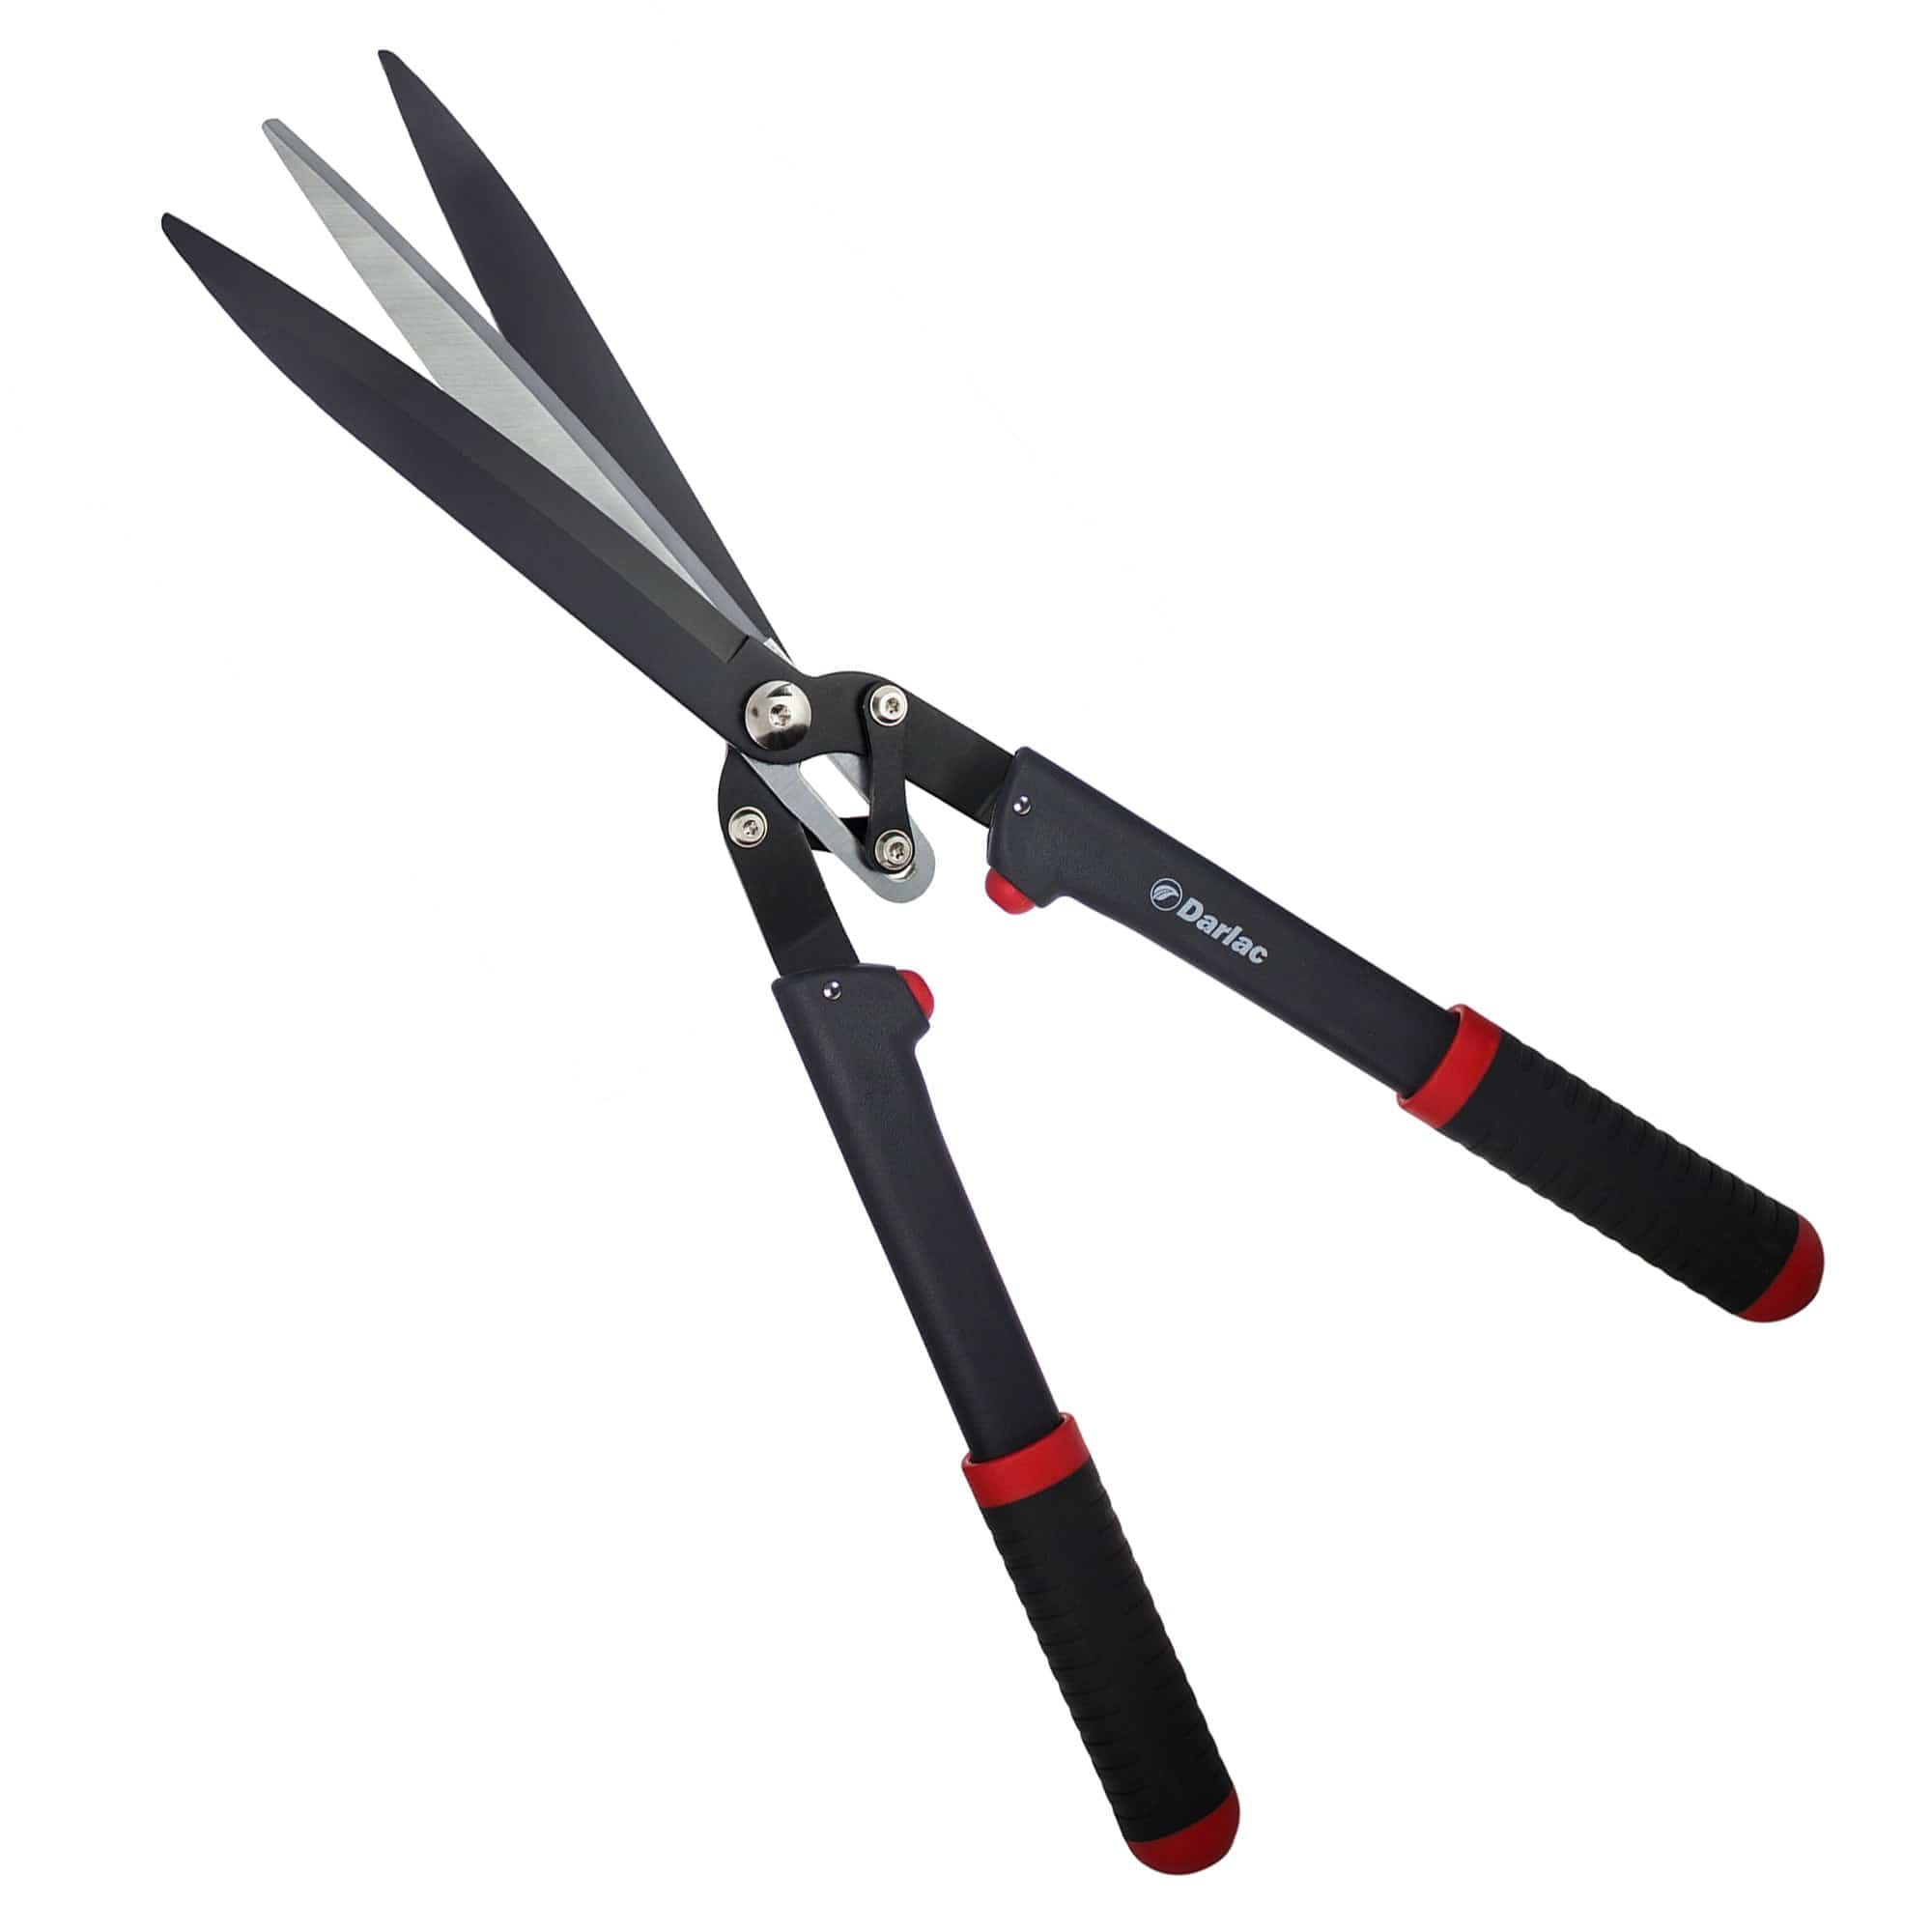 dt-brown HARDWARE Darlac Tri-Blade Shear with Fibre Glass Handles